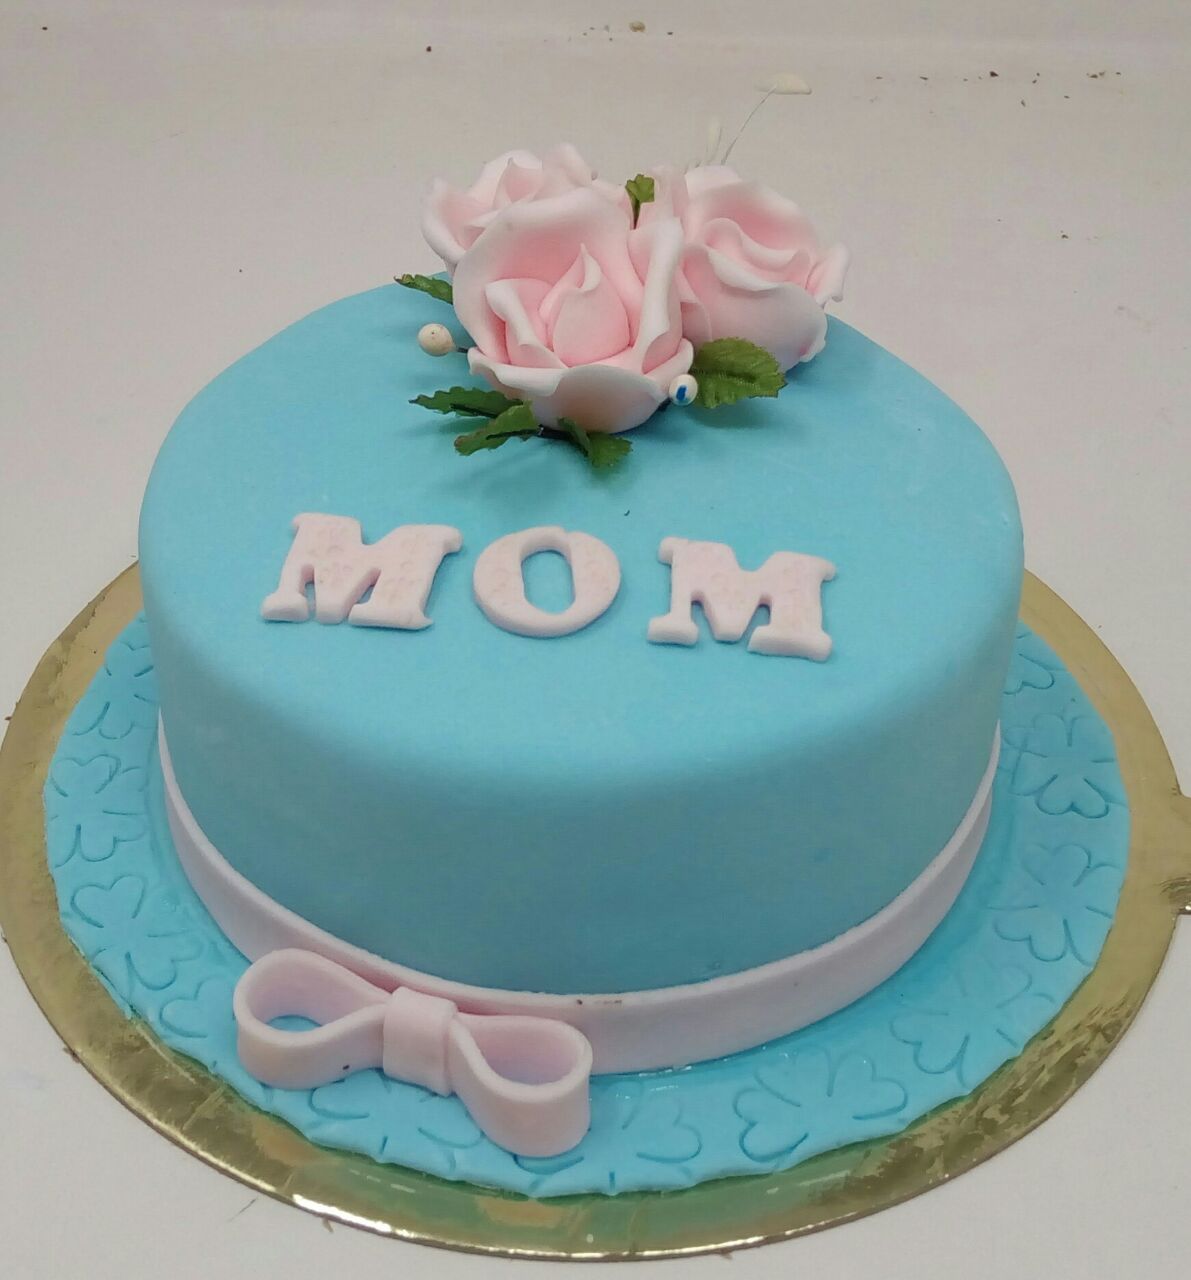 Exotic Rose N Cake Combo - Buy, Send & Order Online Delivery In India -  Cake2homes